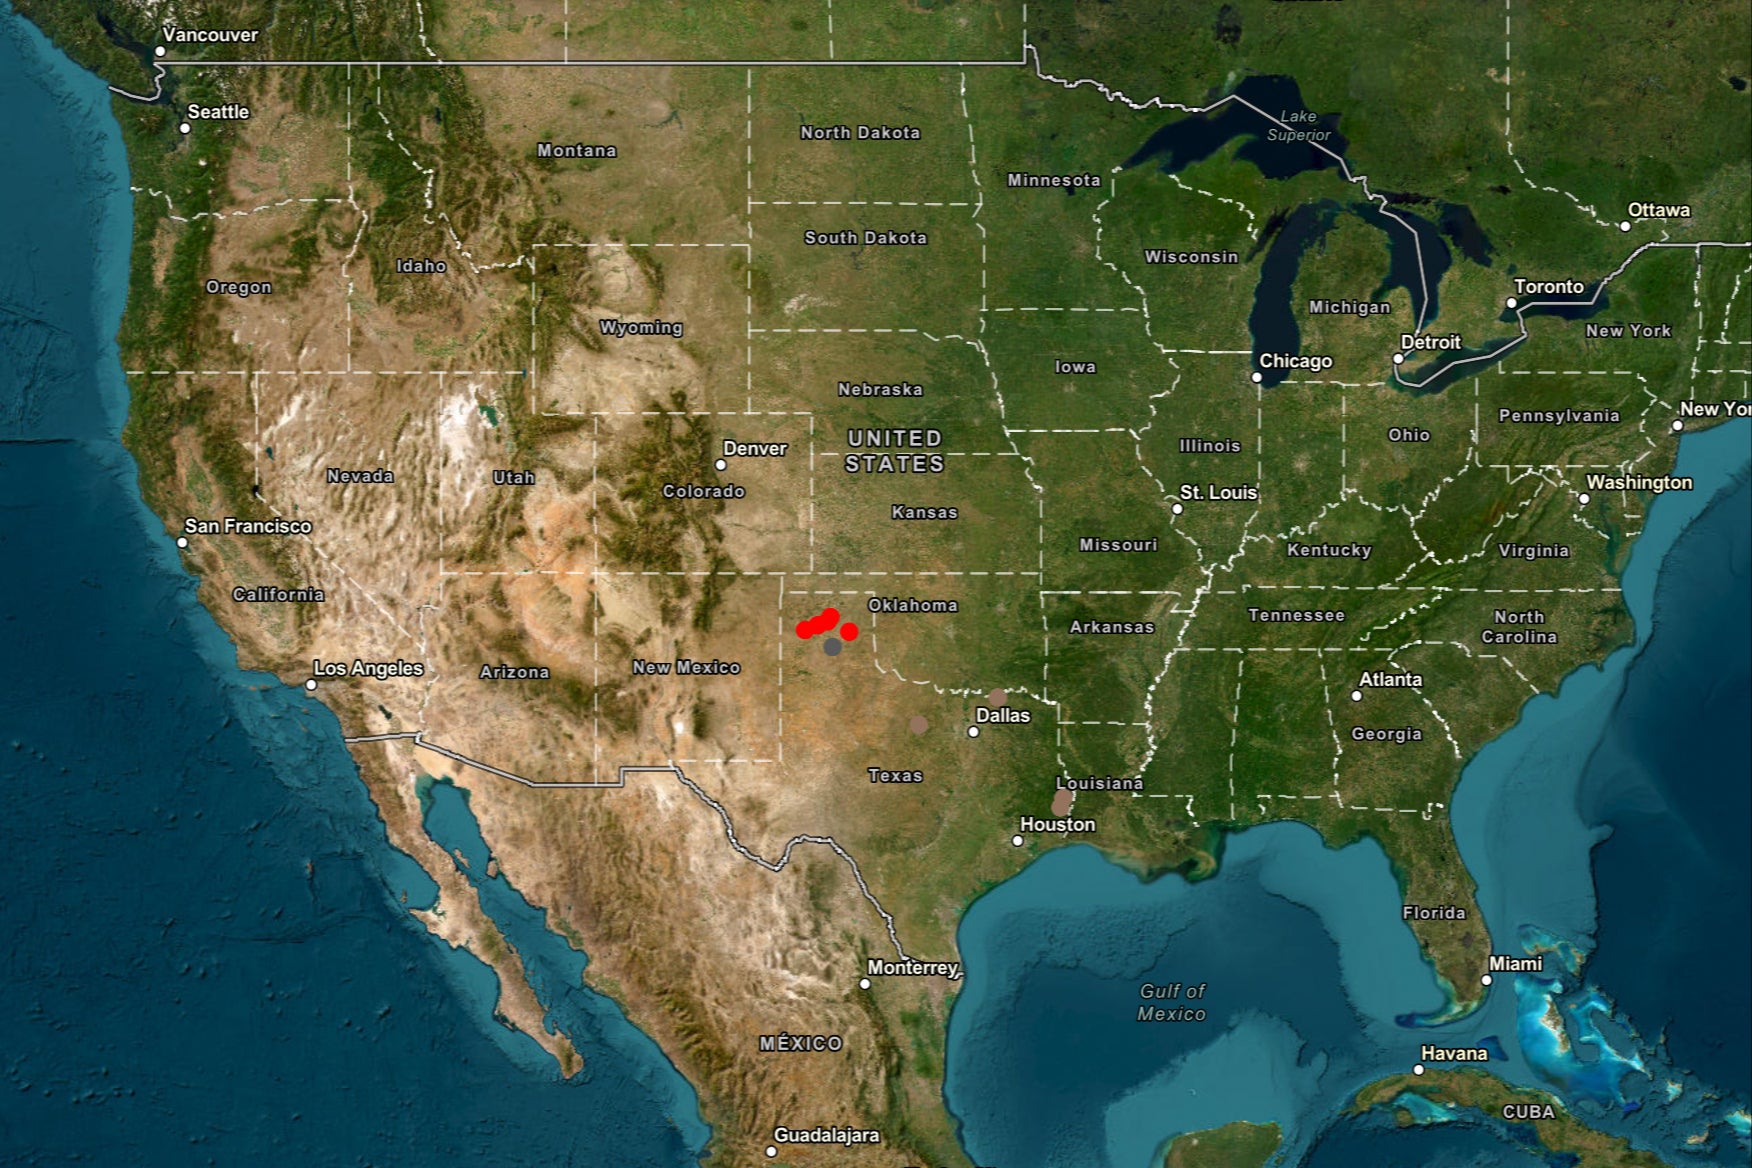 Red dots indicate active fires in the Texas Panhandle